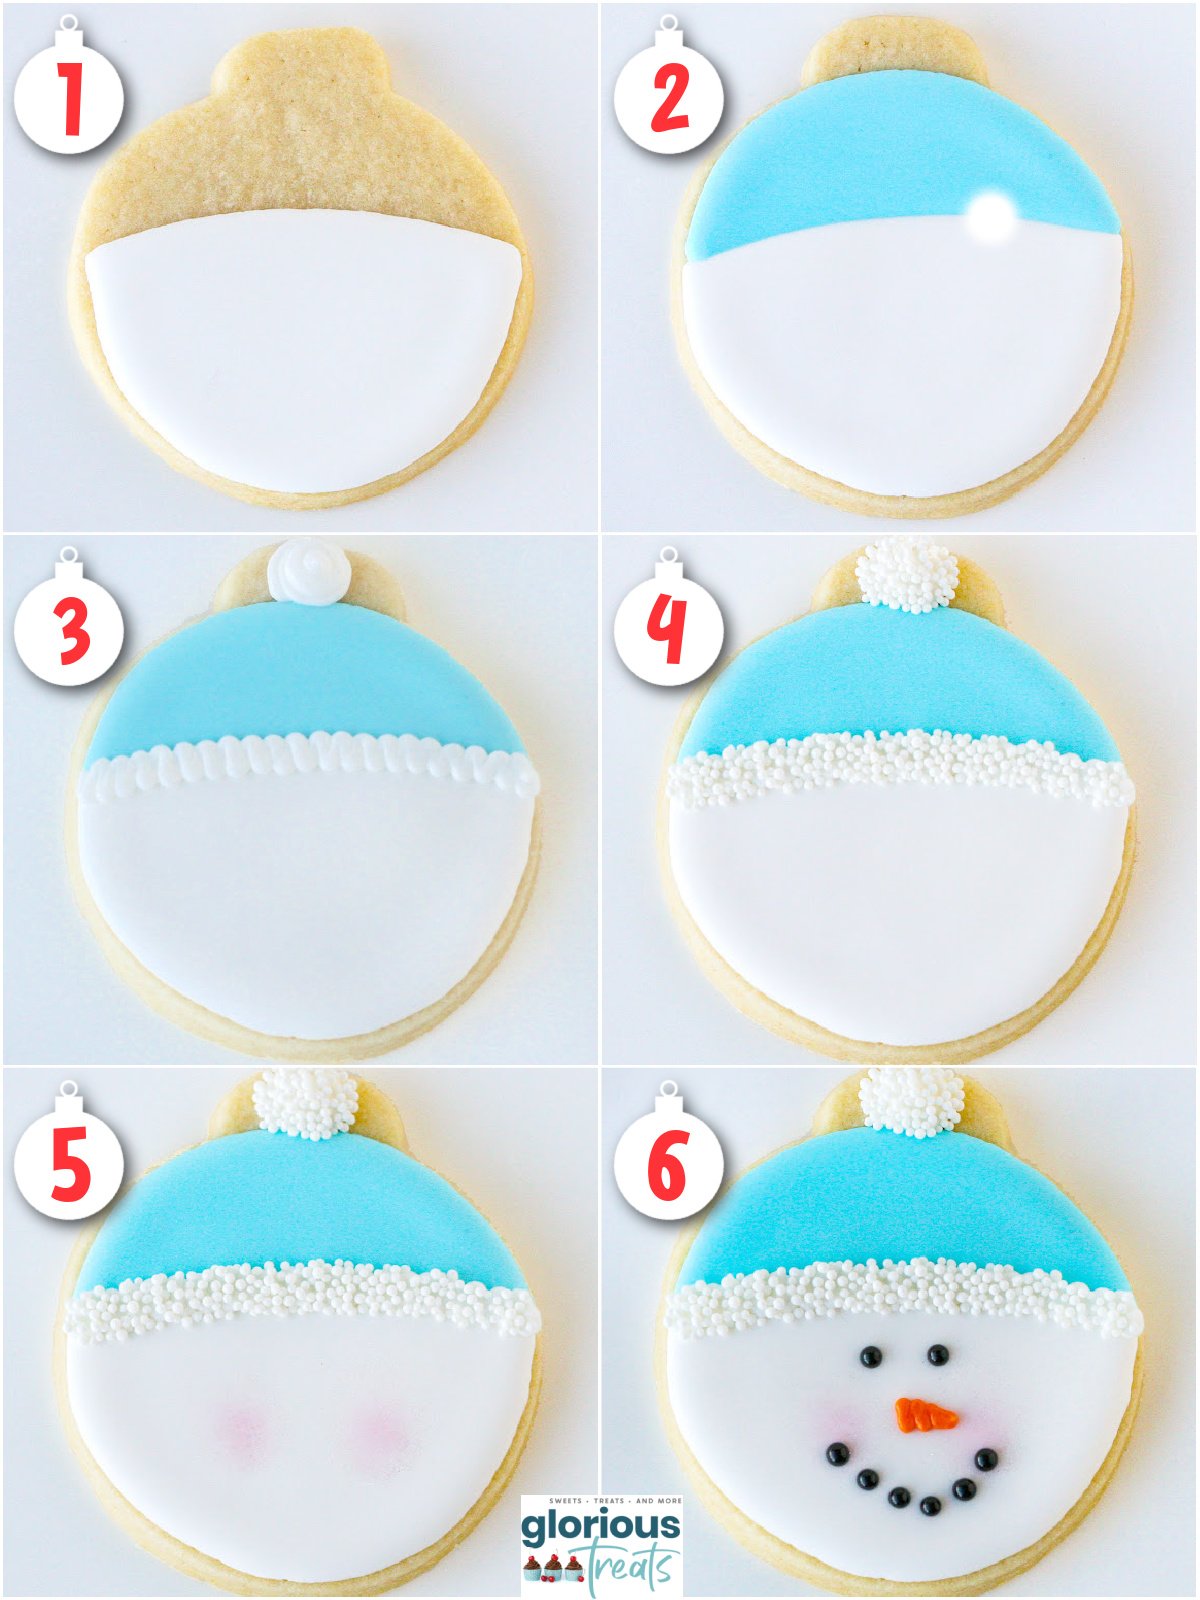 six image collage showing how to decorate snowman face cookies for christmas.